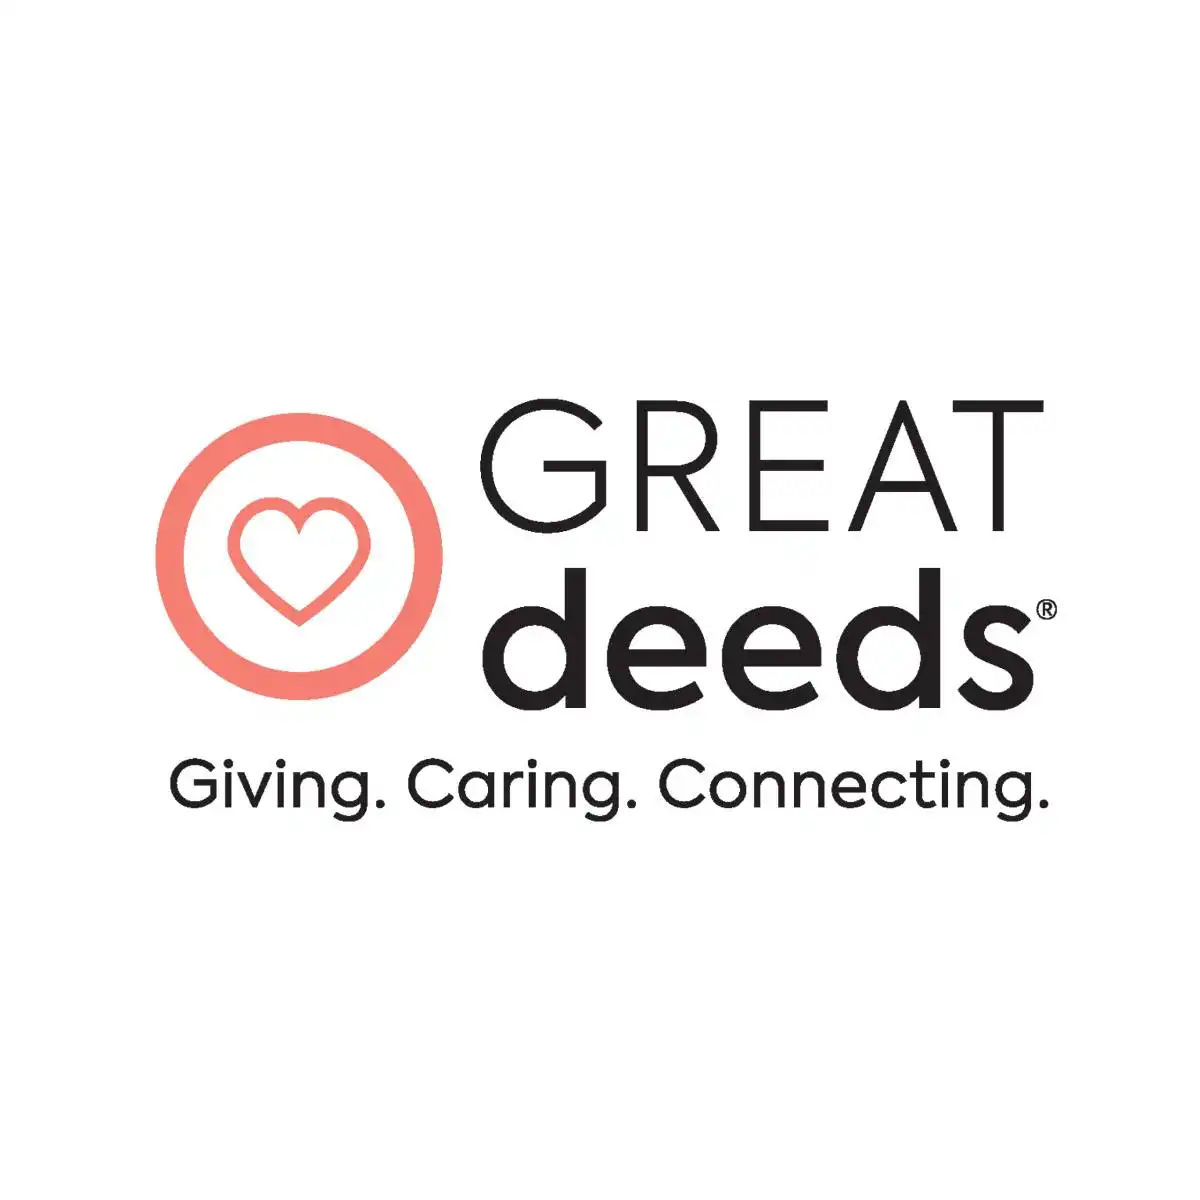 Great Deeds logo. Giving. Caring. Connecting.